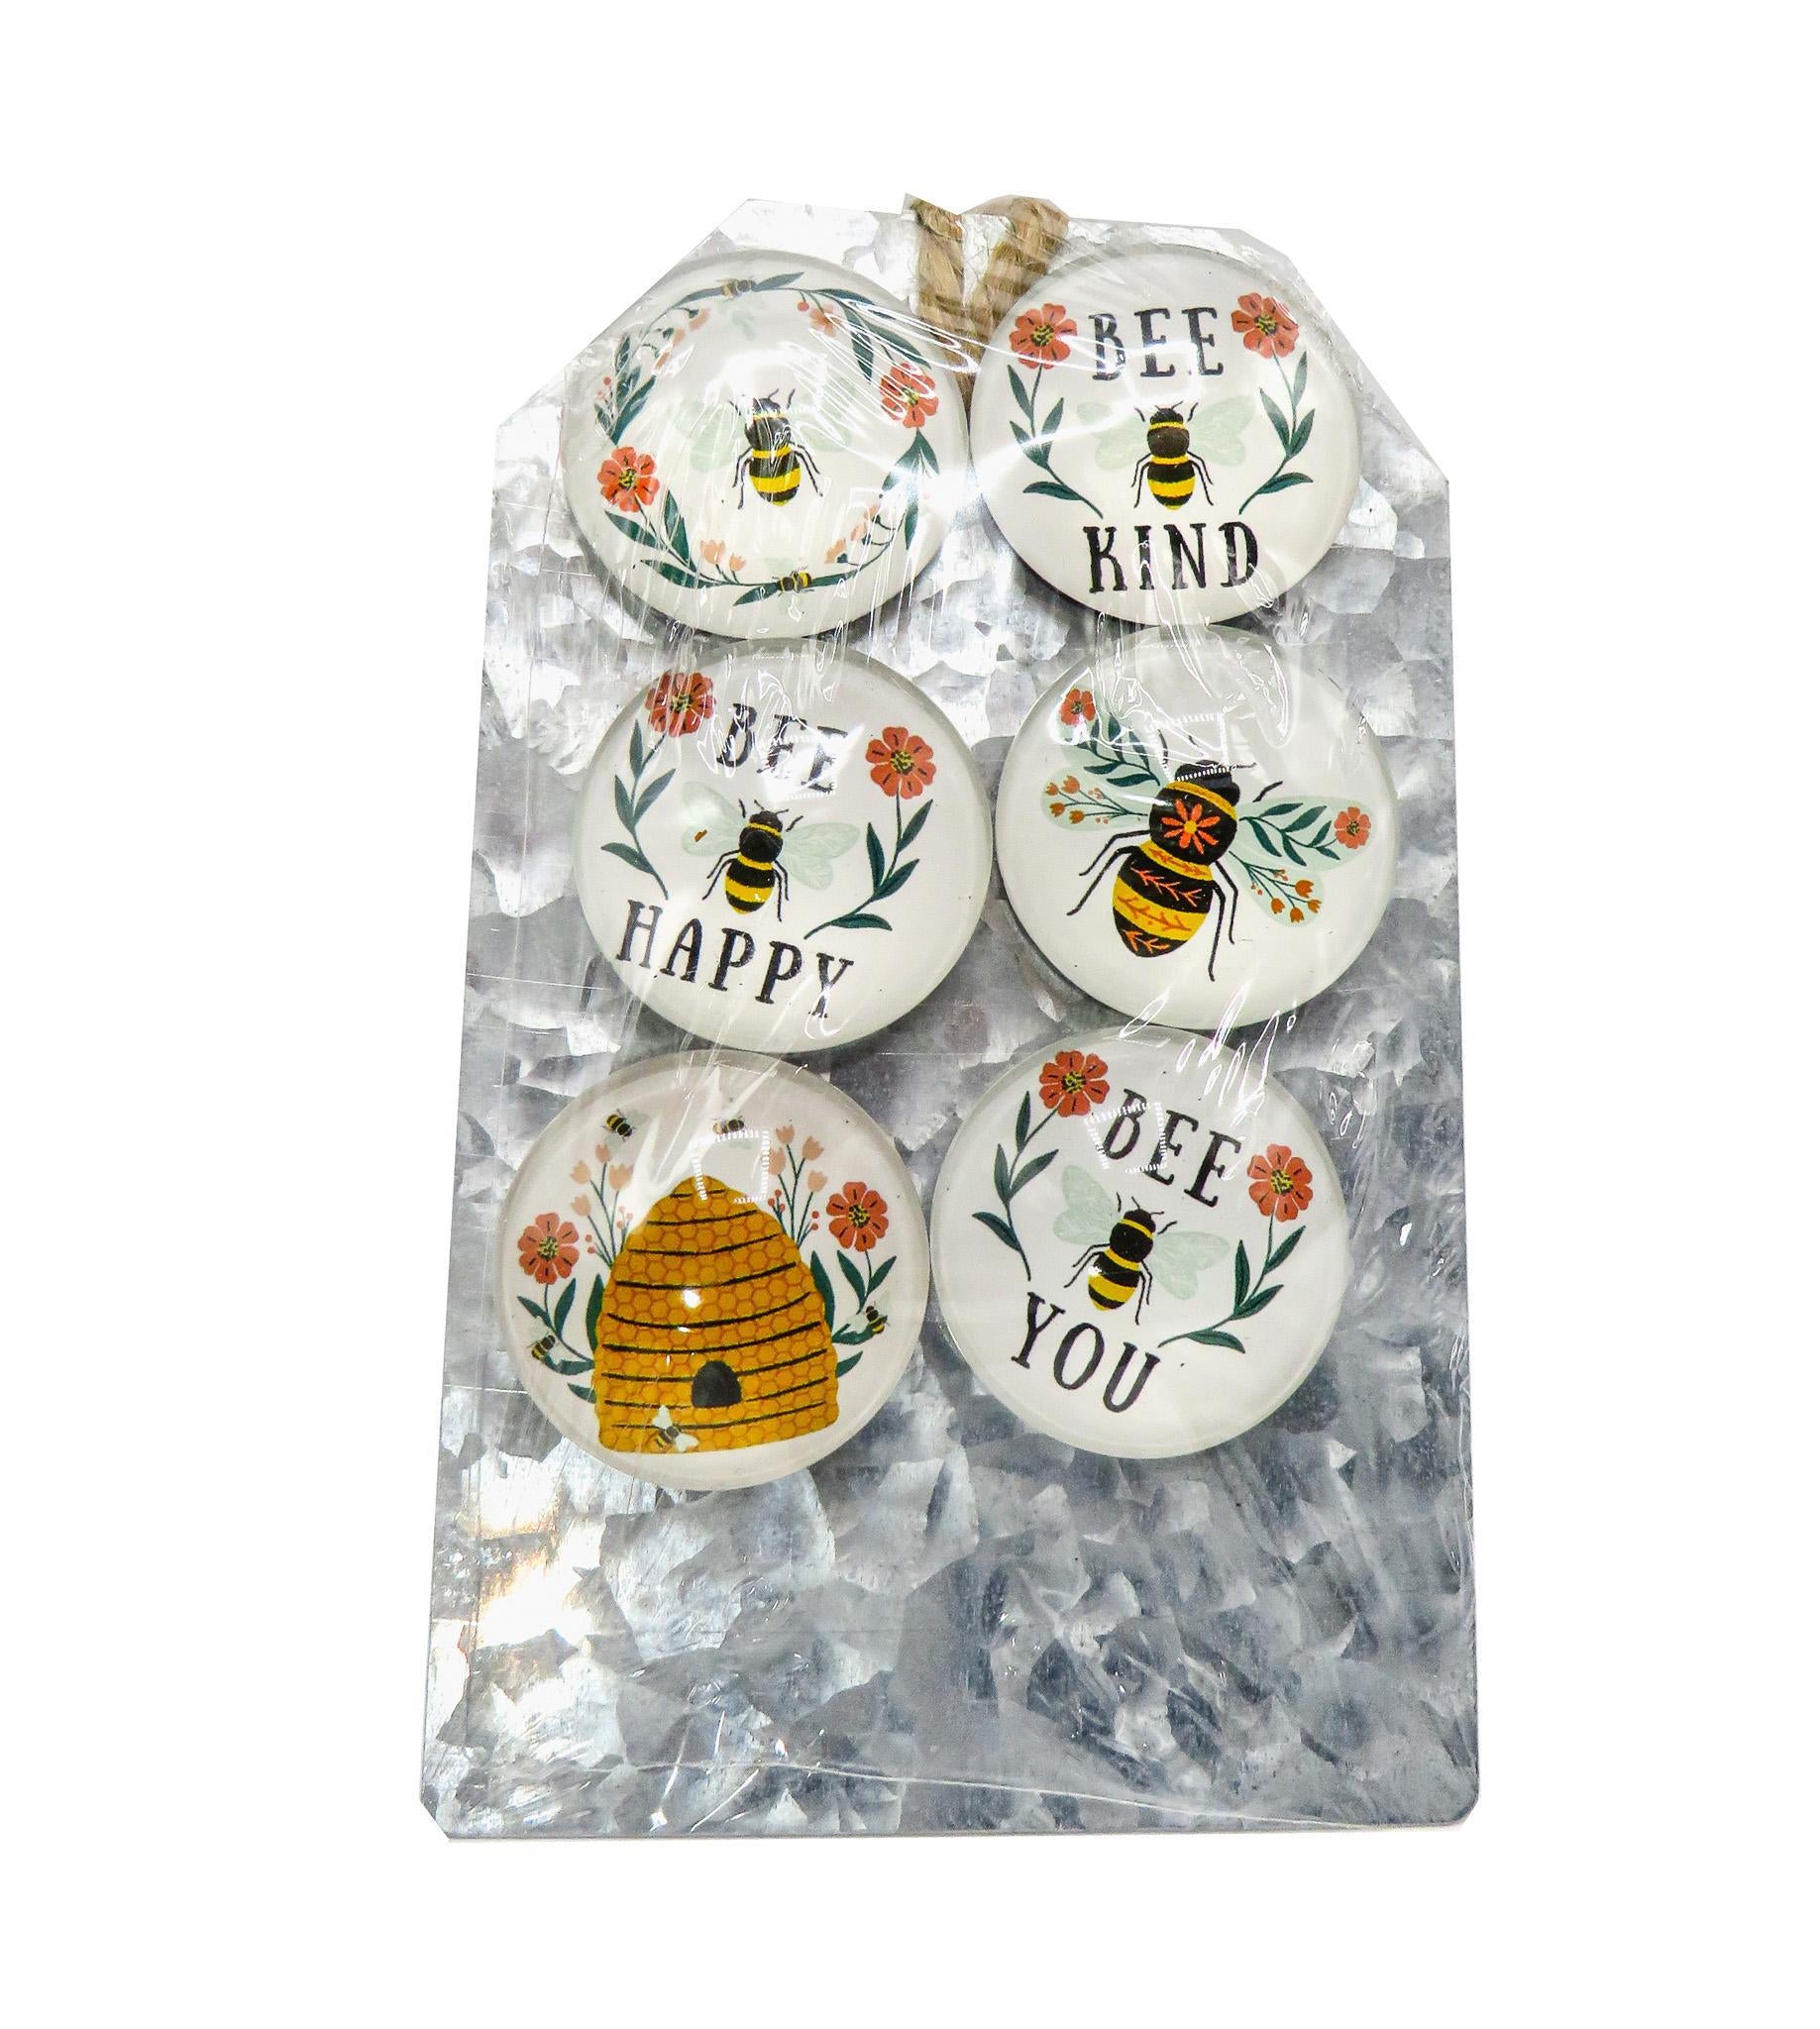 Colorful Bee Glass Magnets 6 Piece Set - Charming and Functional Fridge or Magnetic Board Accents